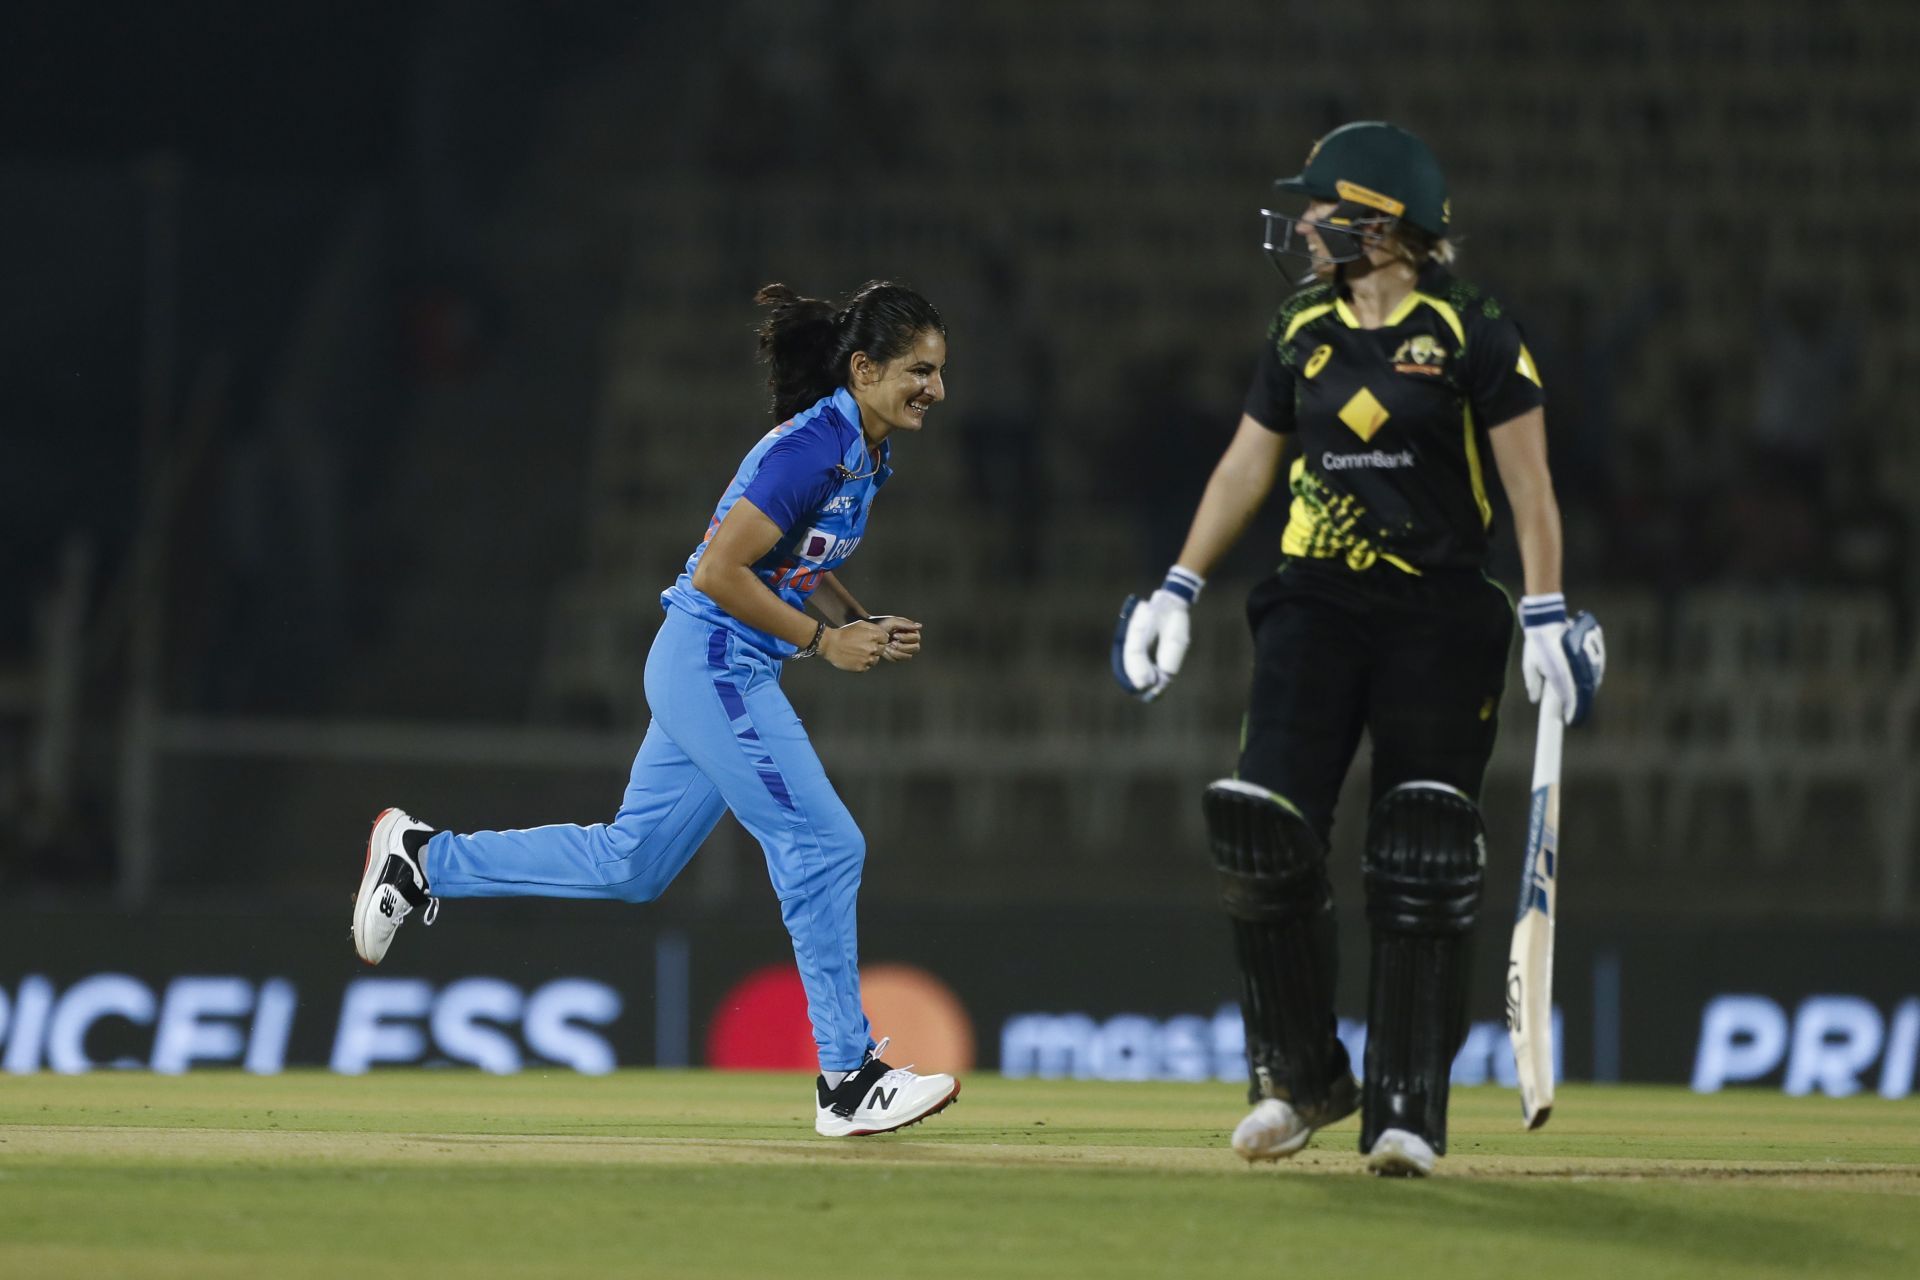 Renuka Singh dismissed Alyssa Healy for a duck in the Commonwealth Games group-stage game.